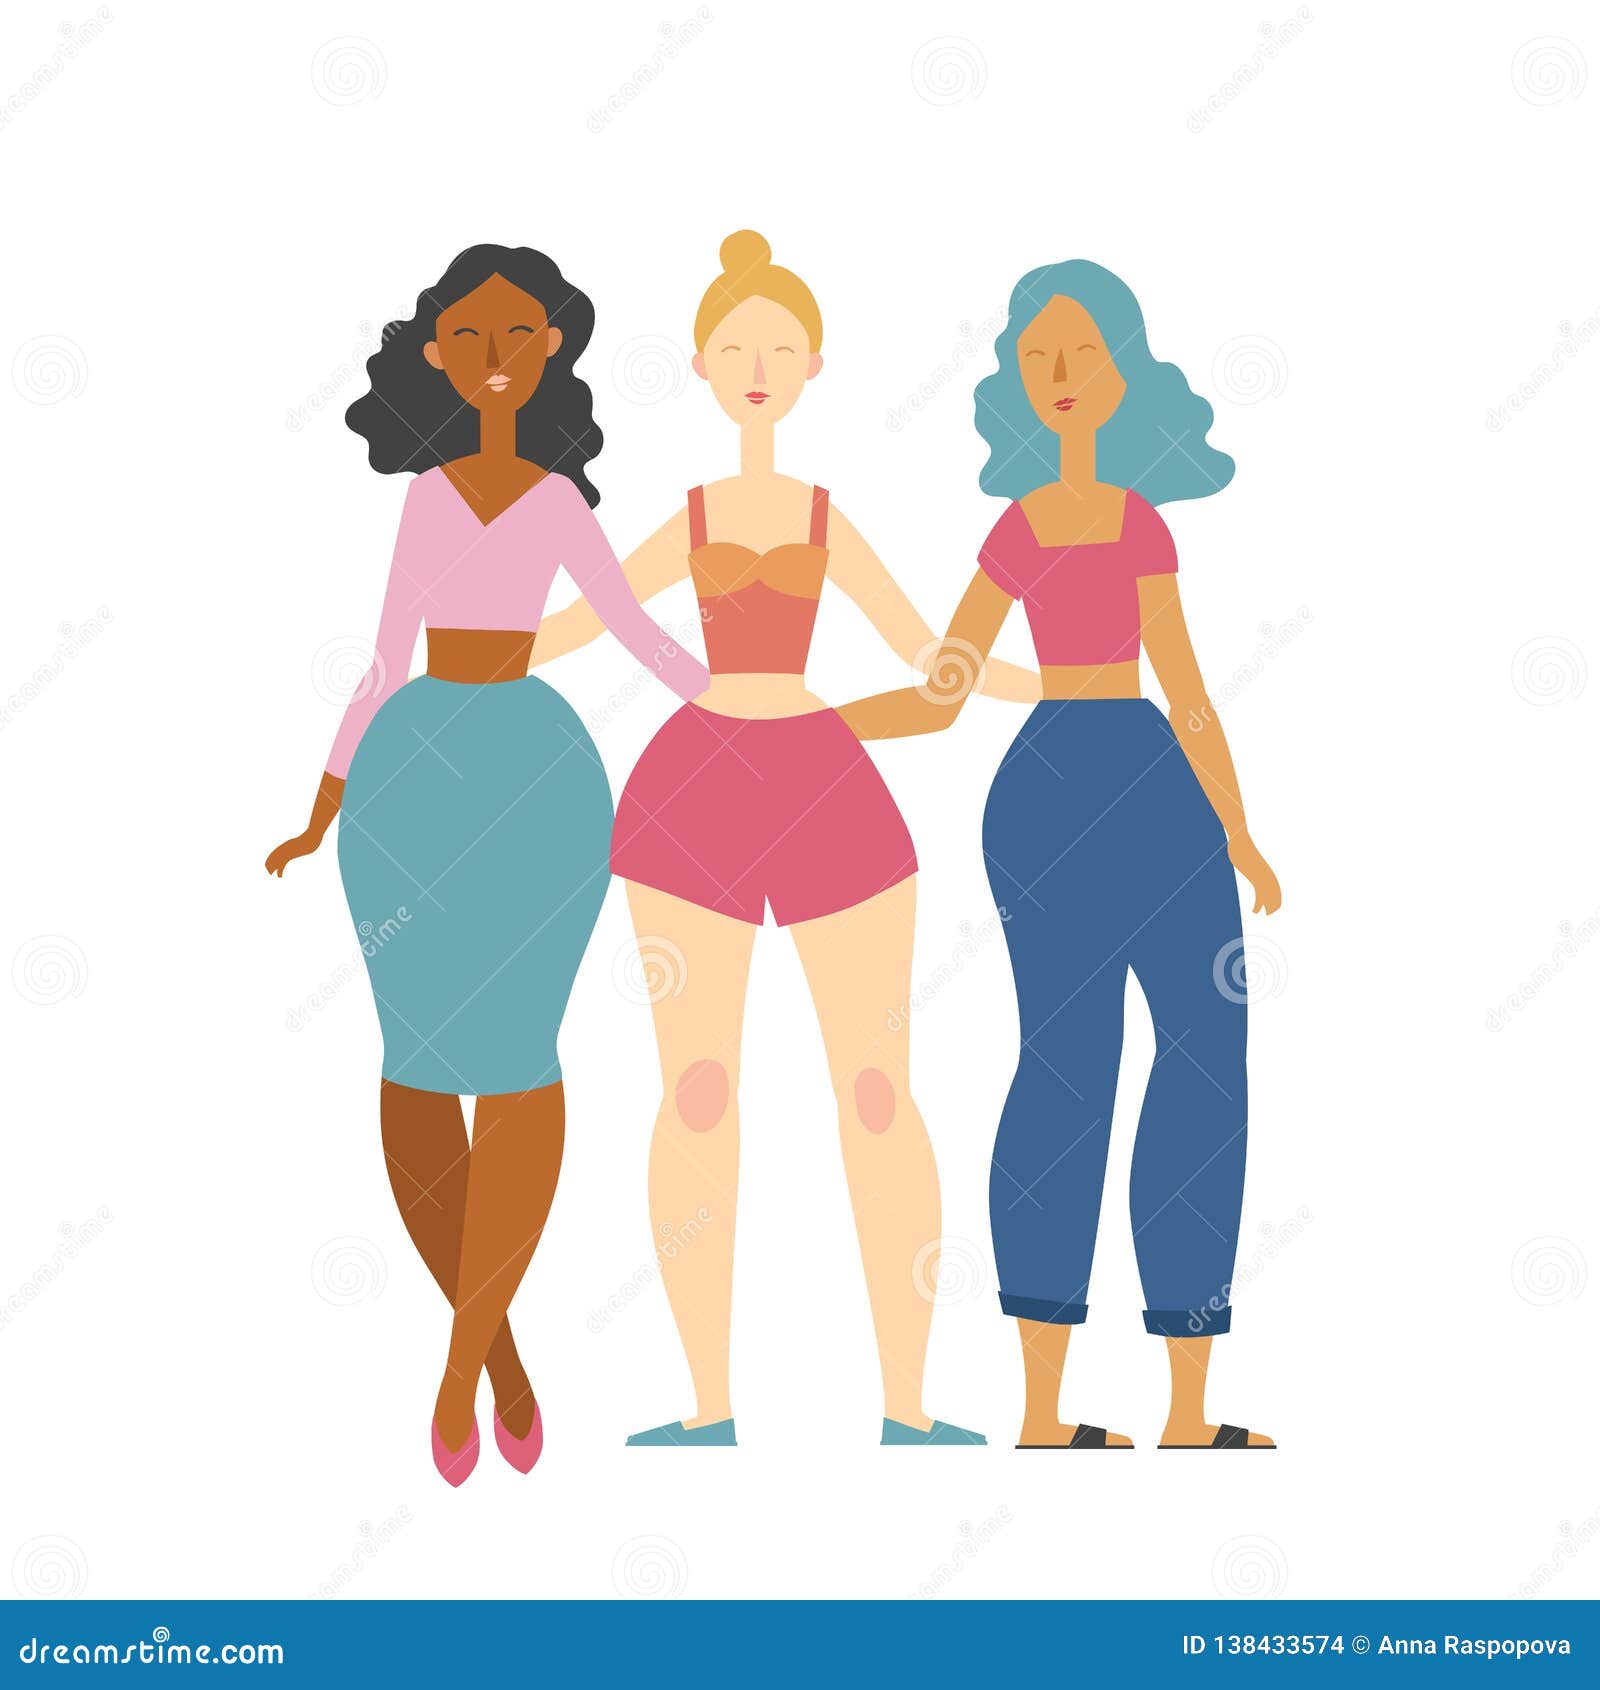 Three Best Friends Girls Stock Illustrations 81 Three Best Friends Girls Stock Illustrations Vectors Clipart Dreamstime https www dreamstime com vector illustration three best girl friends three cute girls stand hug each other three best friends image138433574